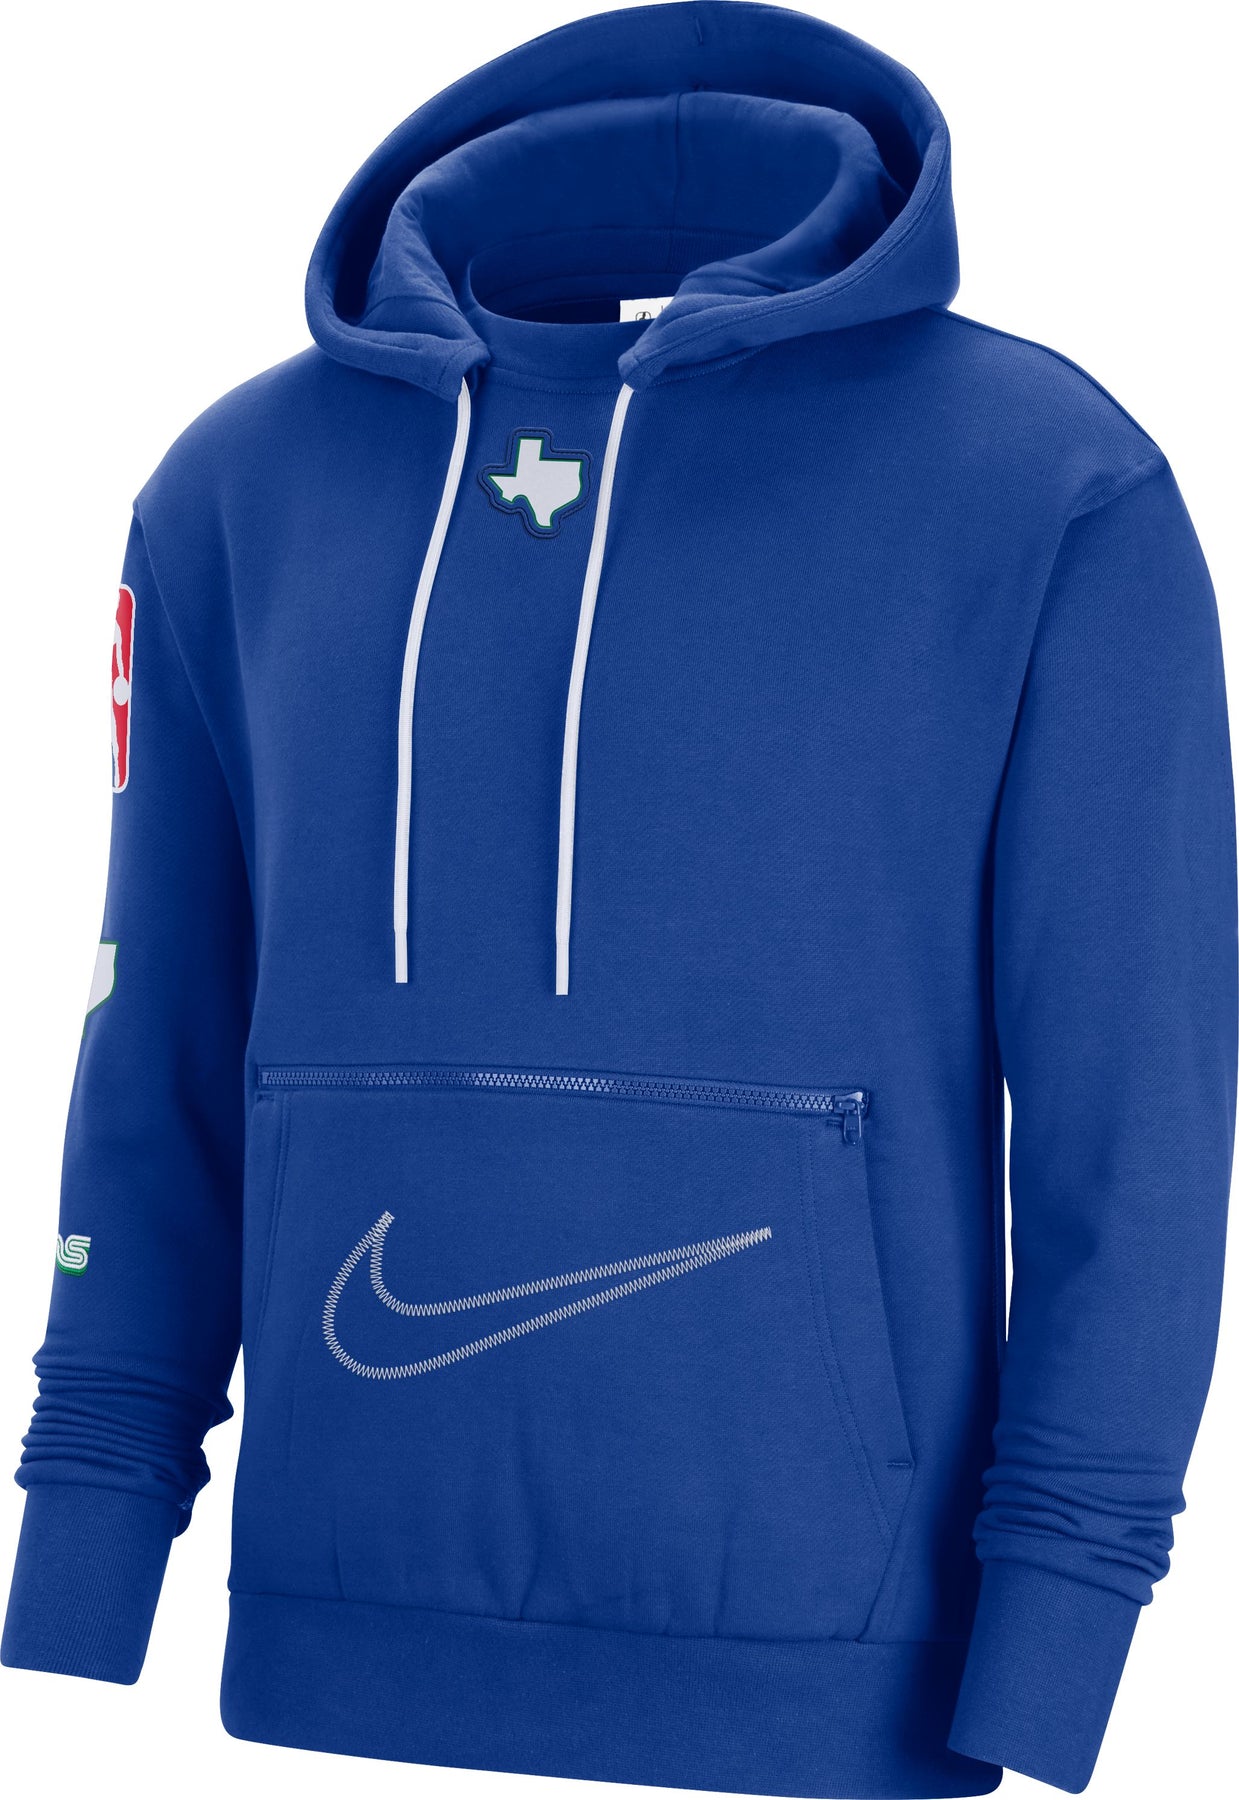 Nike NBA Club Pullover Hoodies Show your love for your squad in